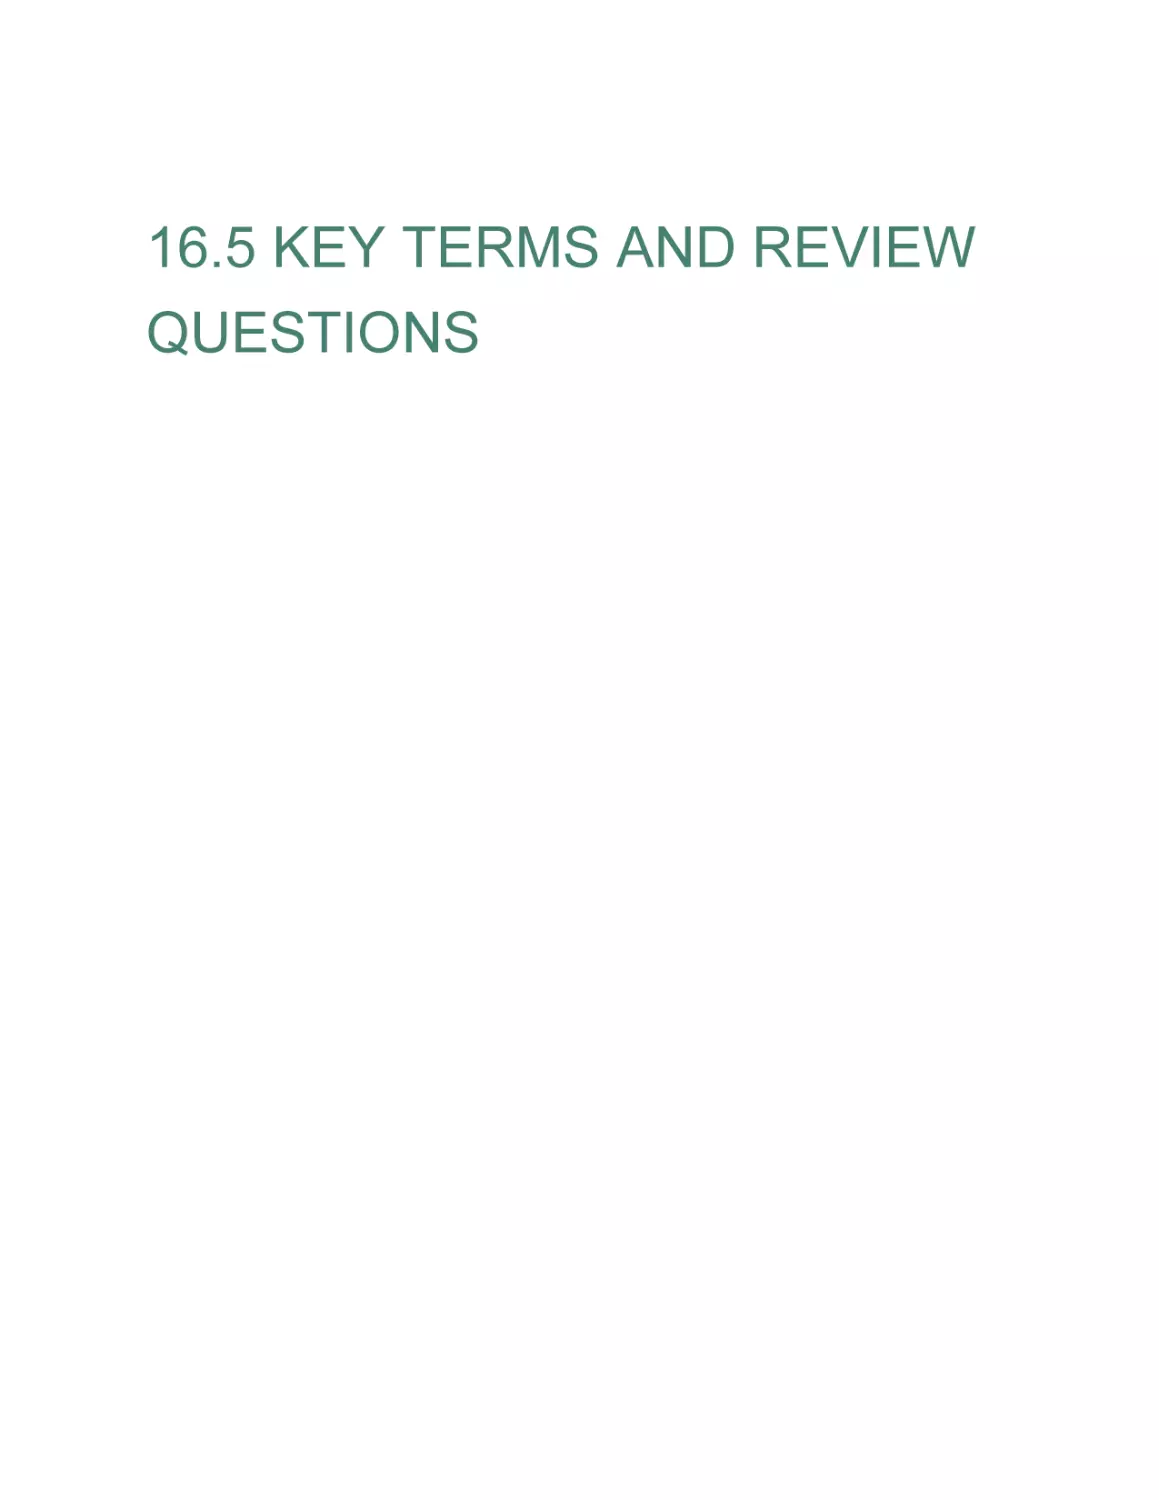 16.5 KEY TERMS AND REVIEW QUESTIONS